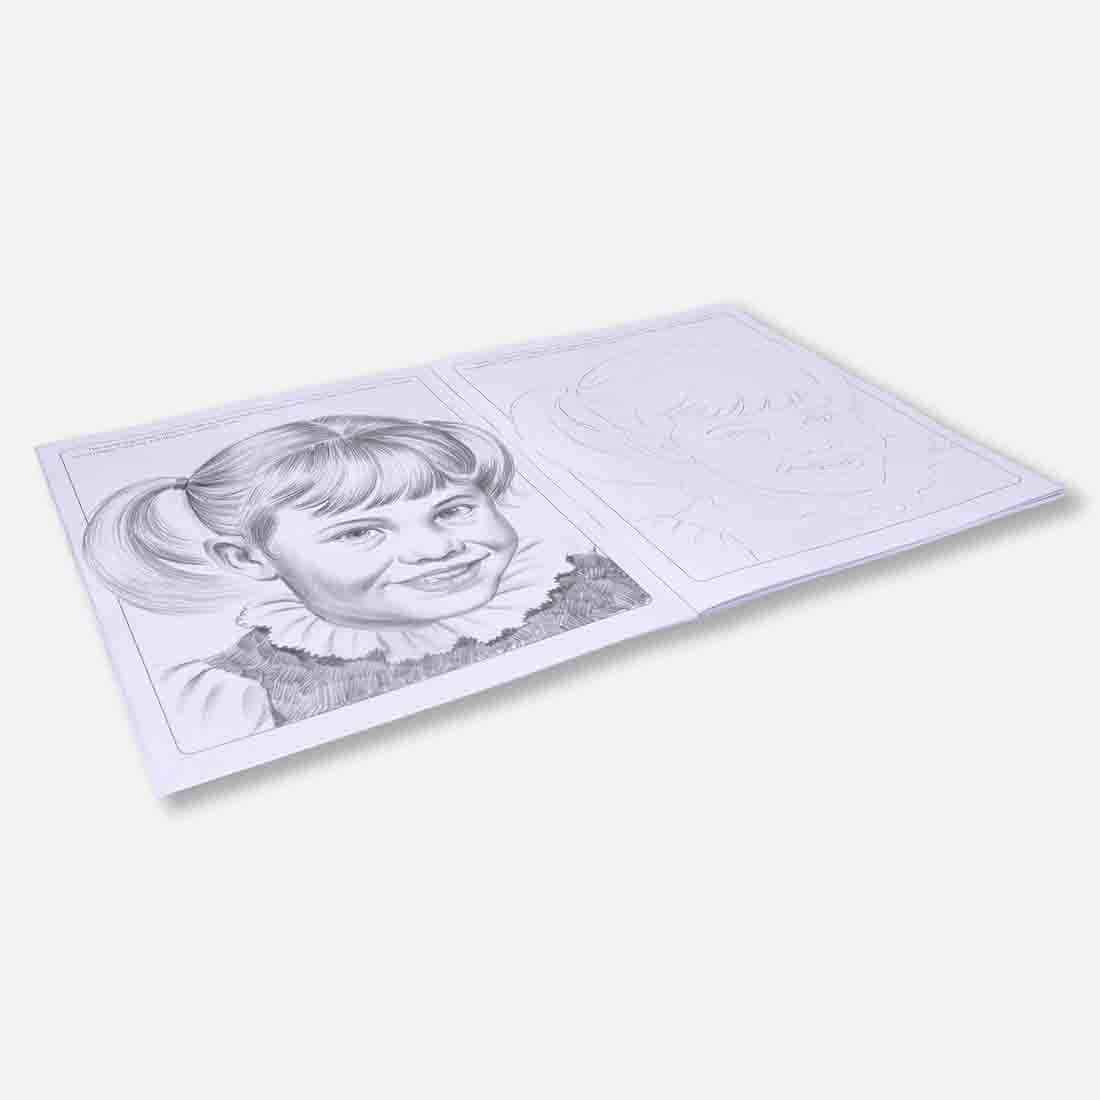 Navneet Learn Pencil Shading Portraits 1 and 2 â€“ For Elementary Art Prep â€“ How to draw Portraits - Pack of 2 Books